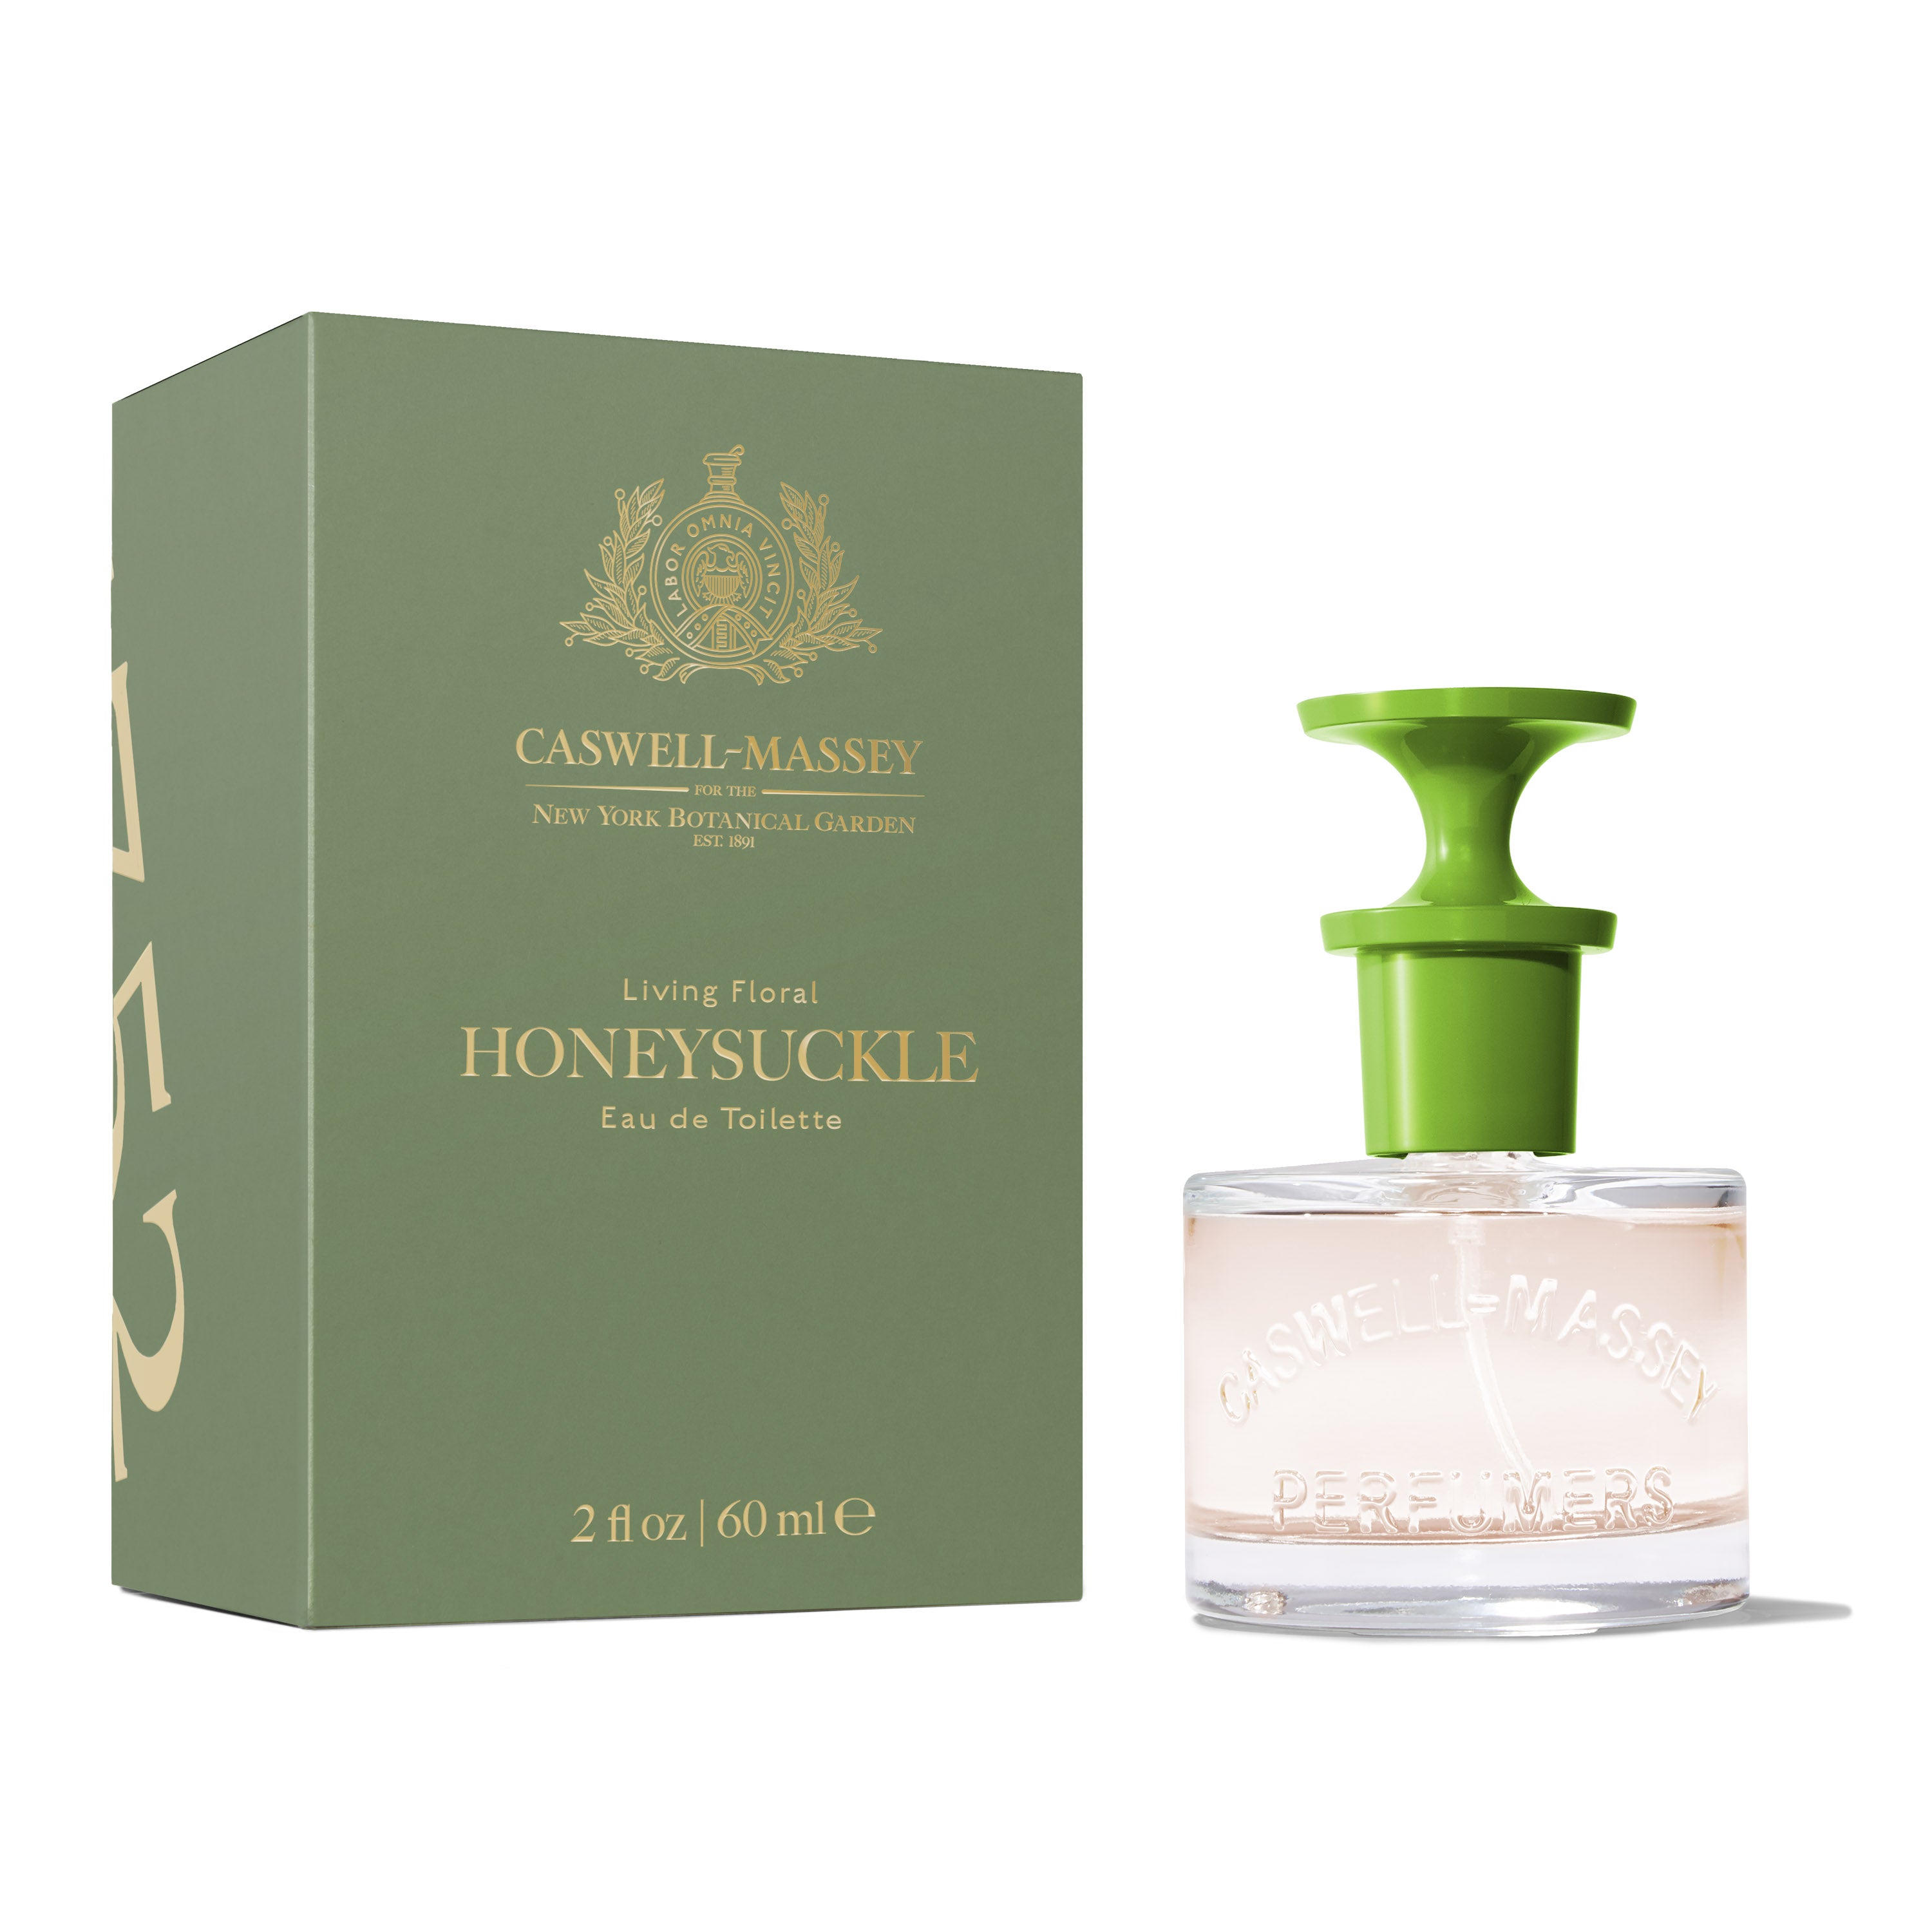 Honeysuckle Eau de Toilette by Caswell-Massey 60mL Full Size, shown with pale green box